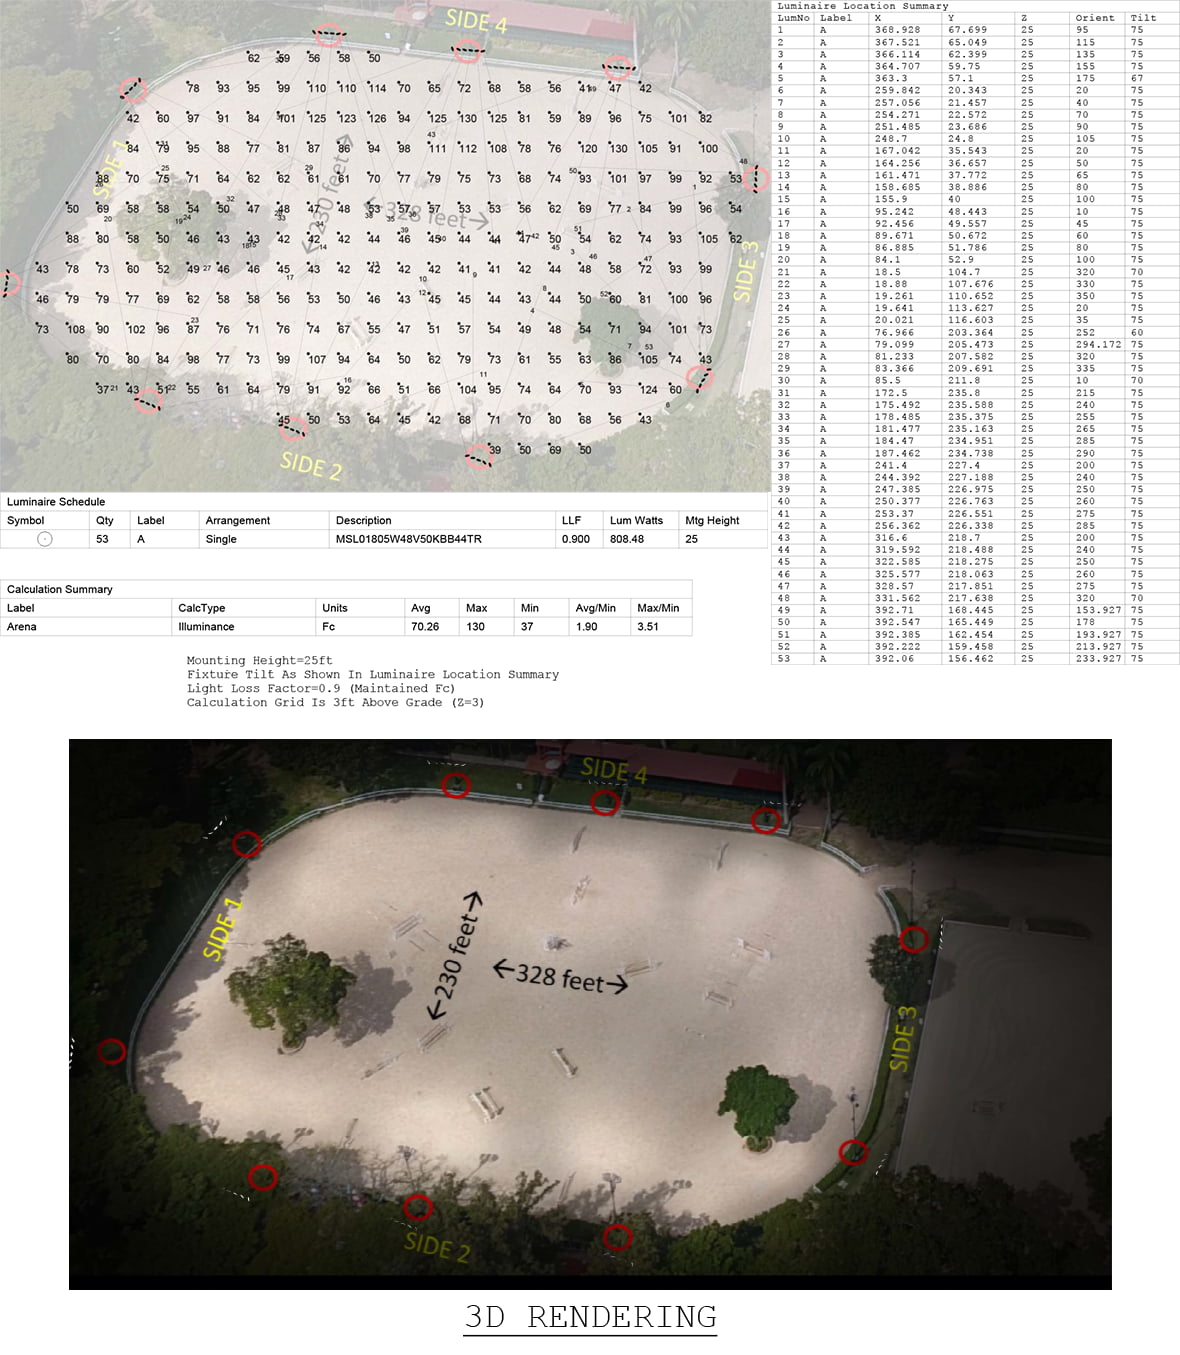 Photometric lighting plan for a horse arena. The plan lays out stats such as average foot-candles, lumens, watts, and more.